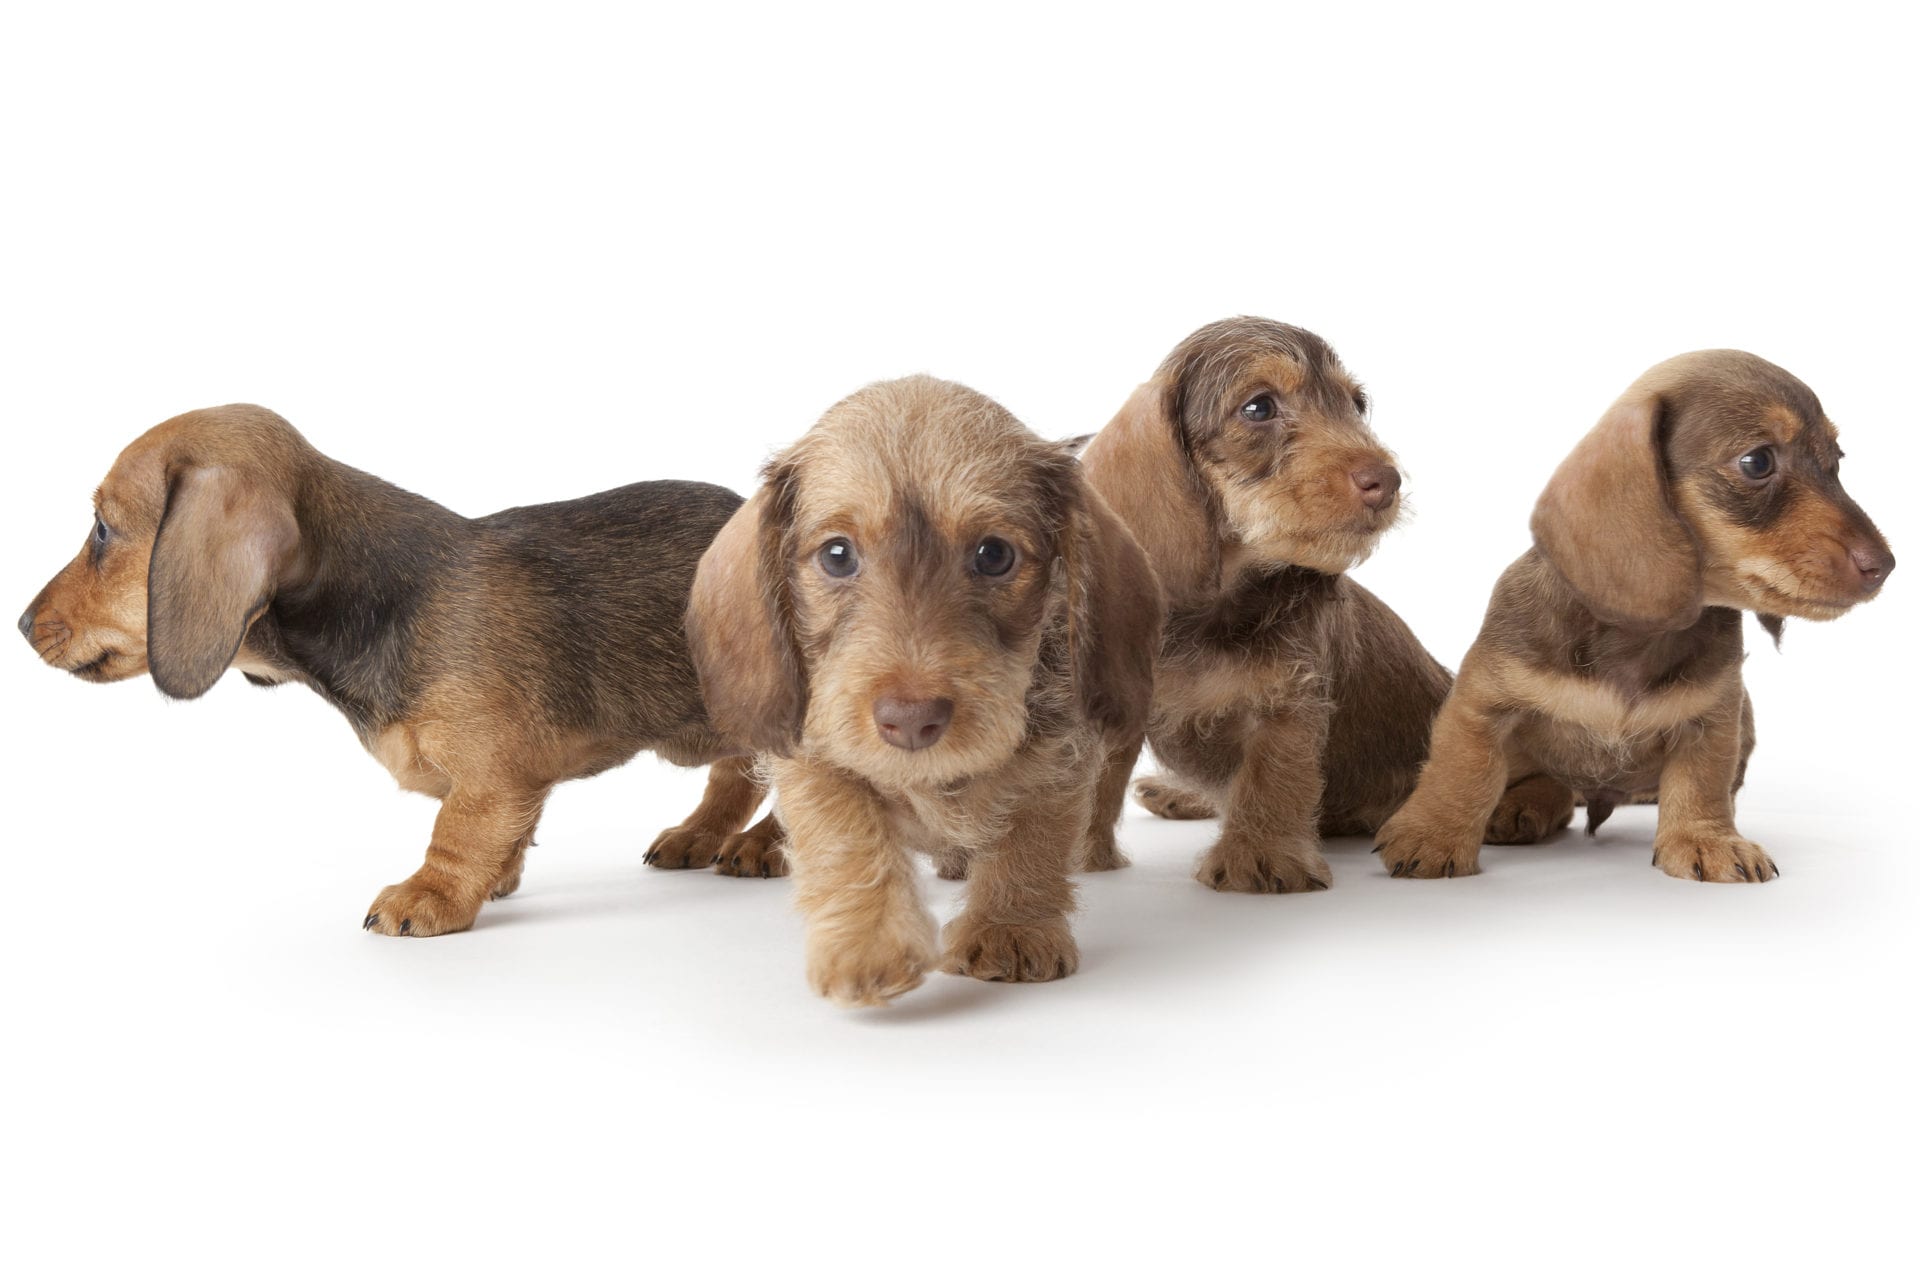 Four wire-haired dachshund puppies on white background